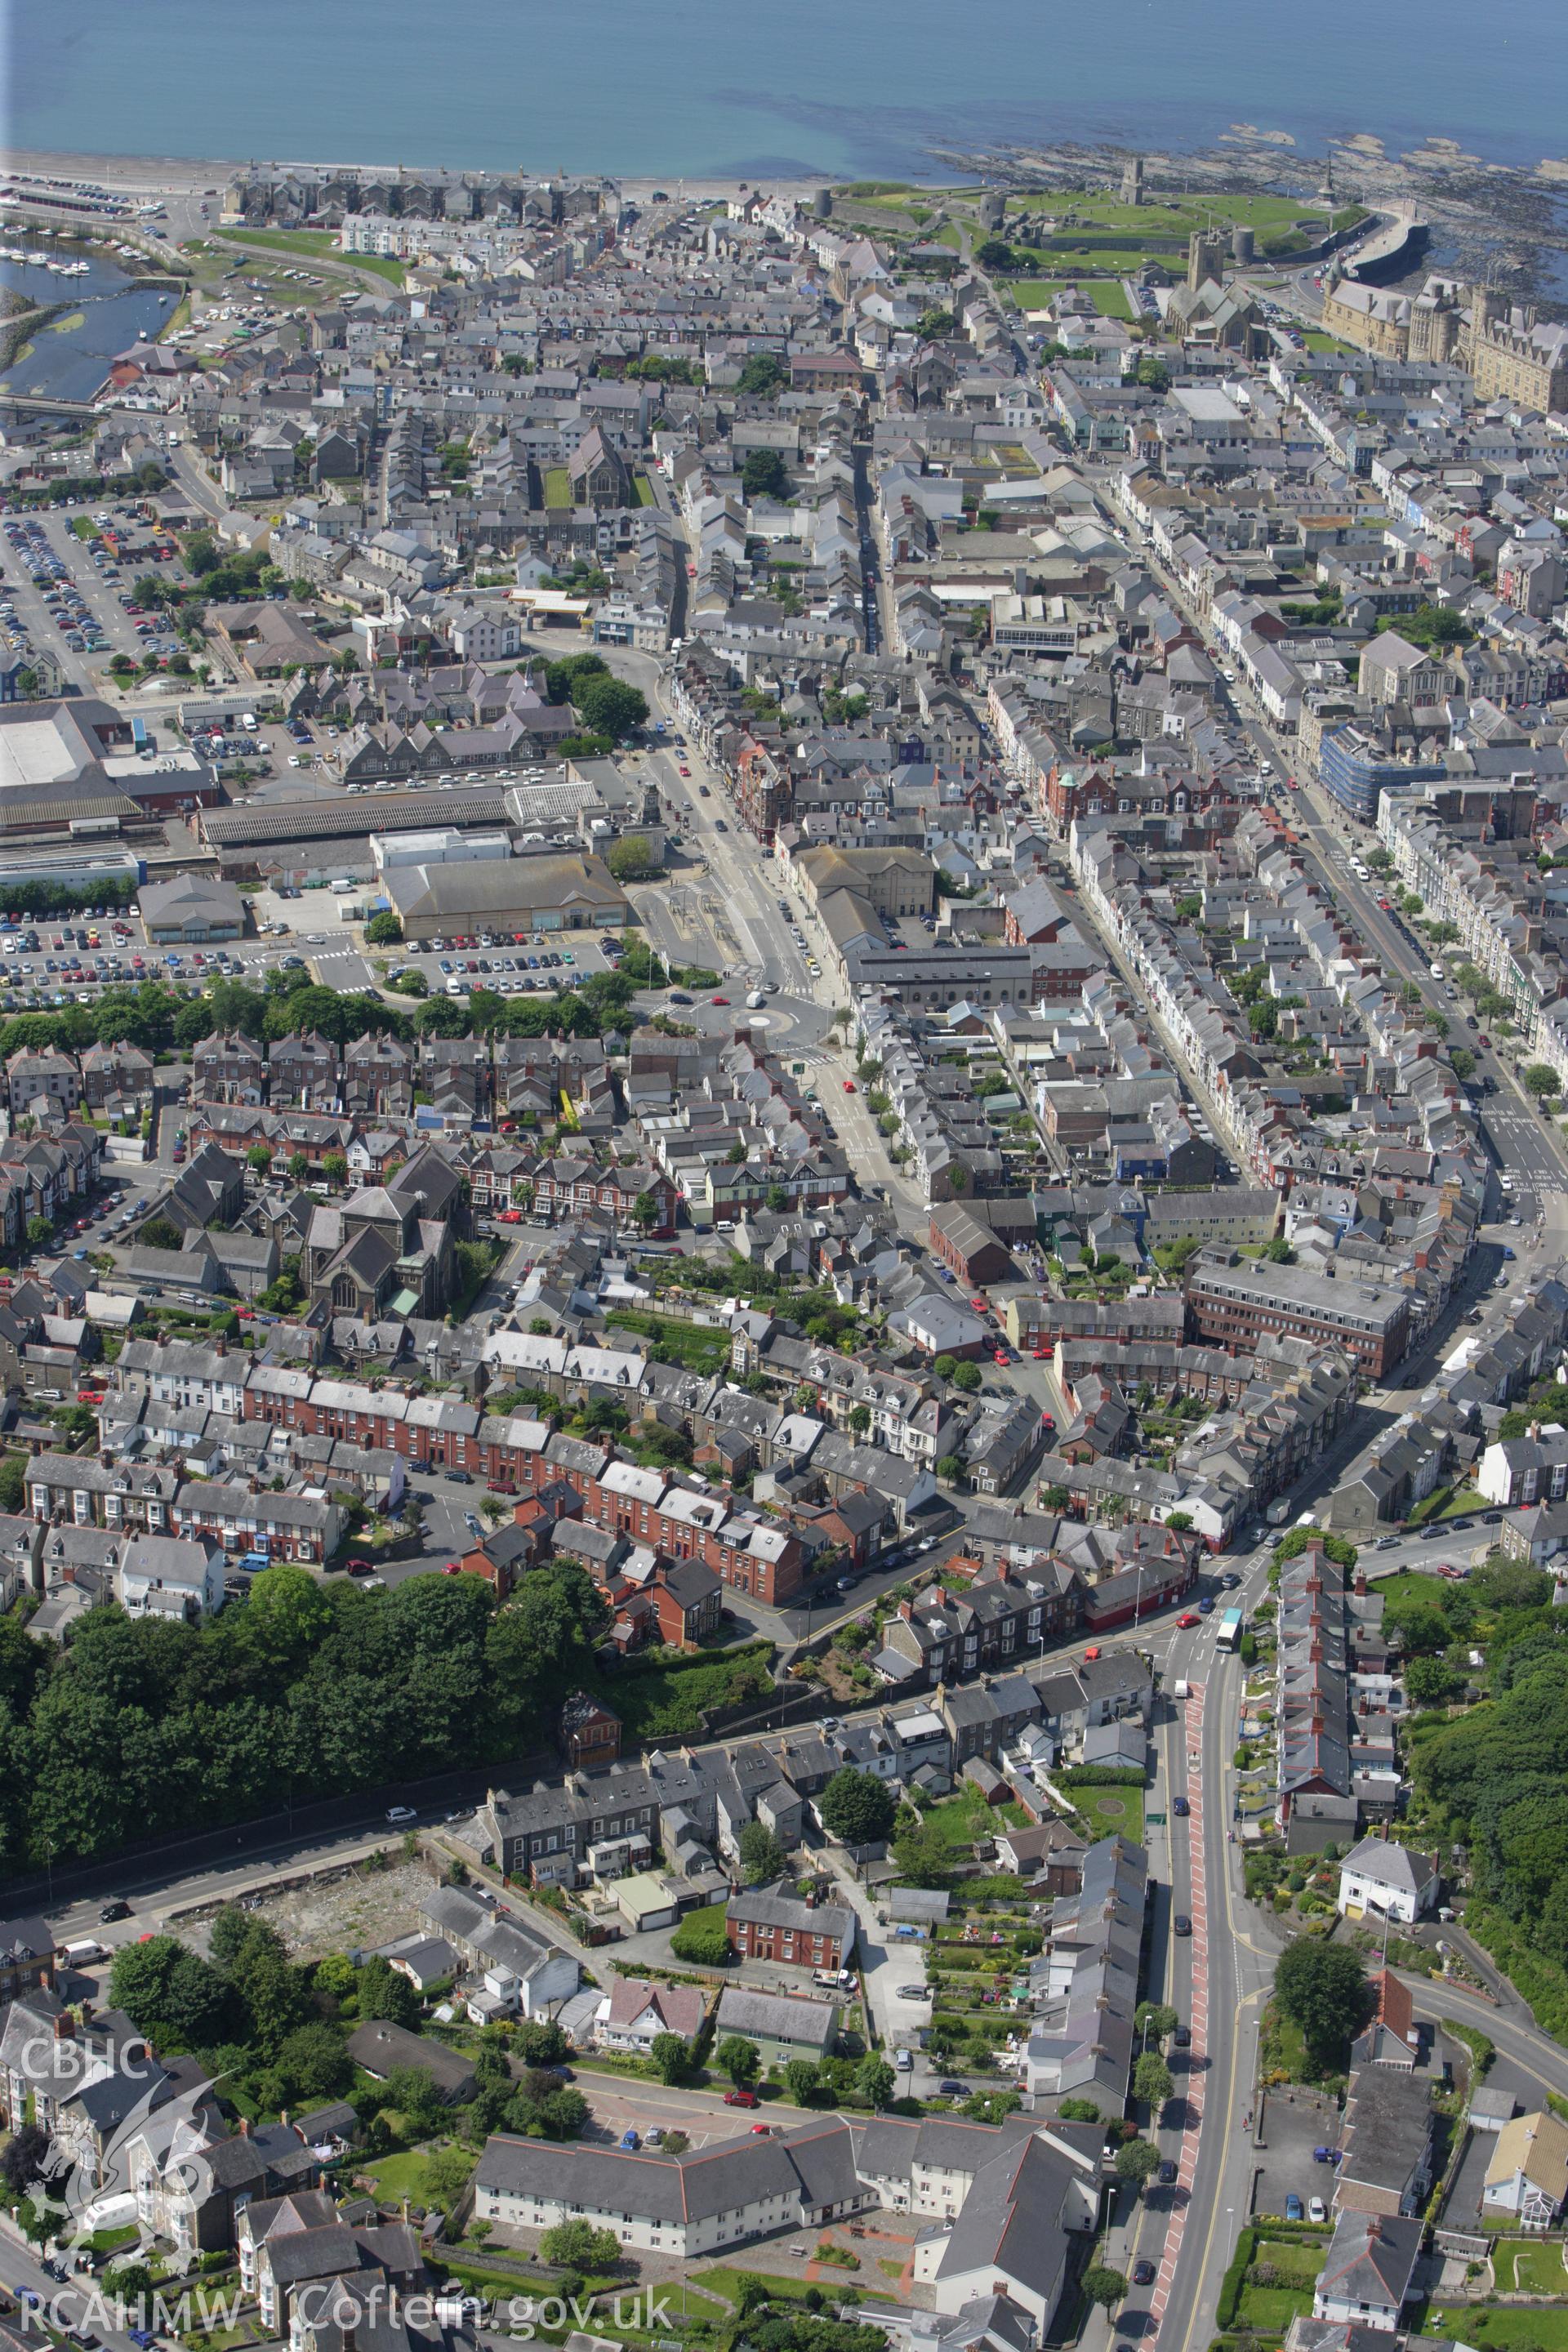 RCAHMW colour oblique aerial photograph of Aberystwyth. Taken on 02 June 2009 by Toby Driver